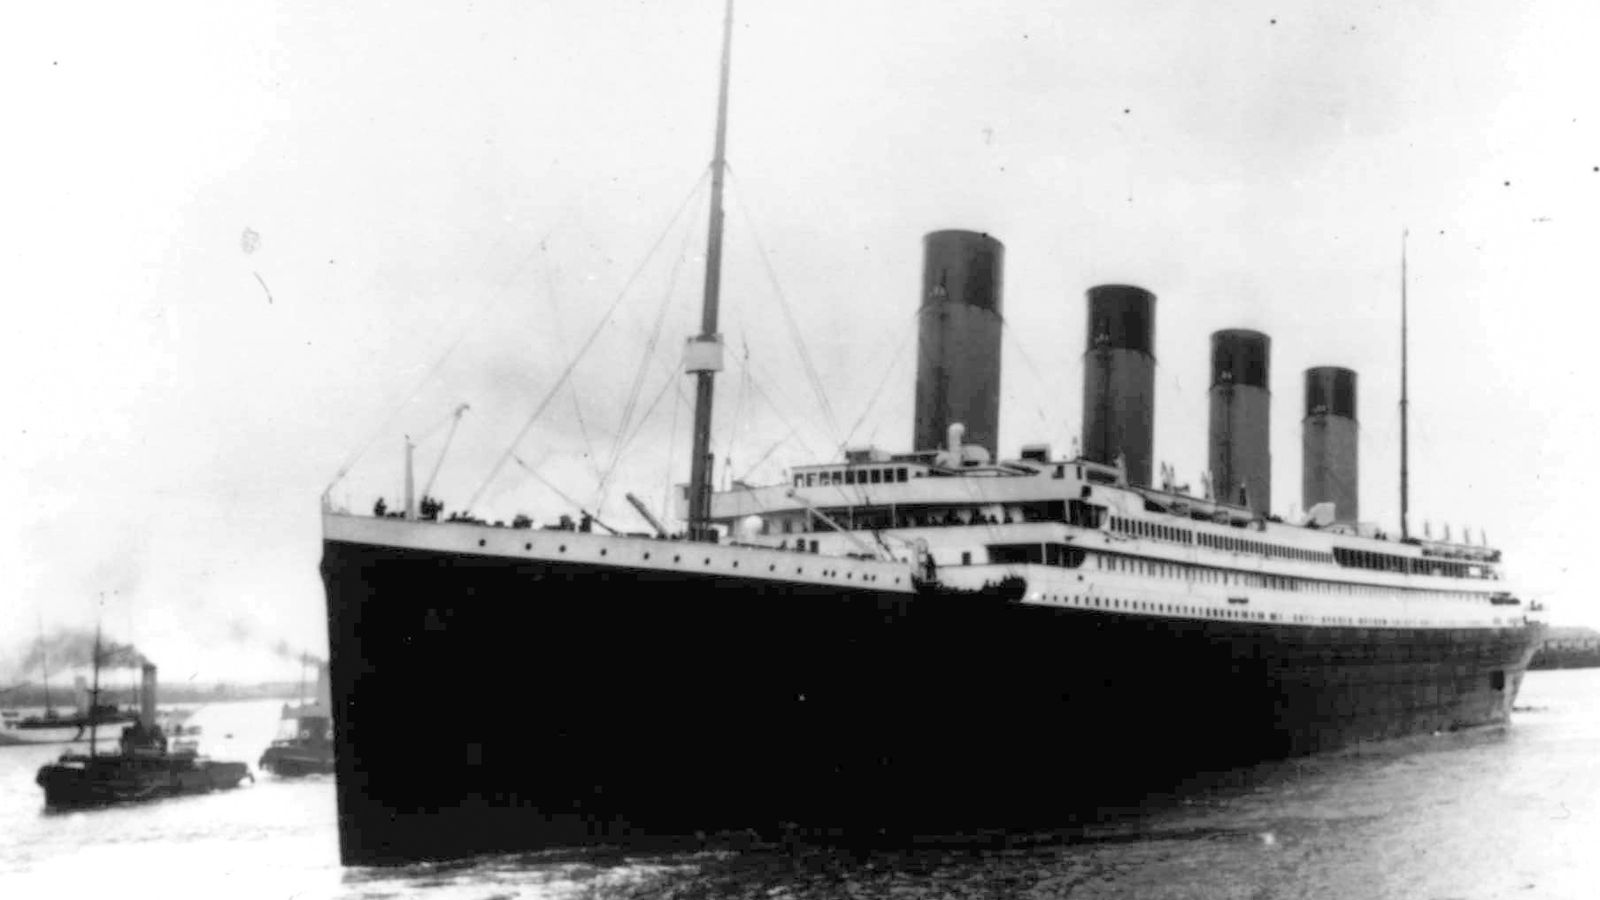 US government challenges planned expedition to recover items from Titanic